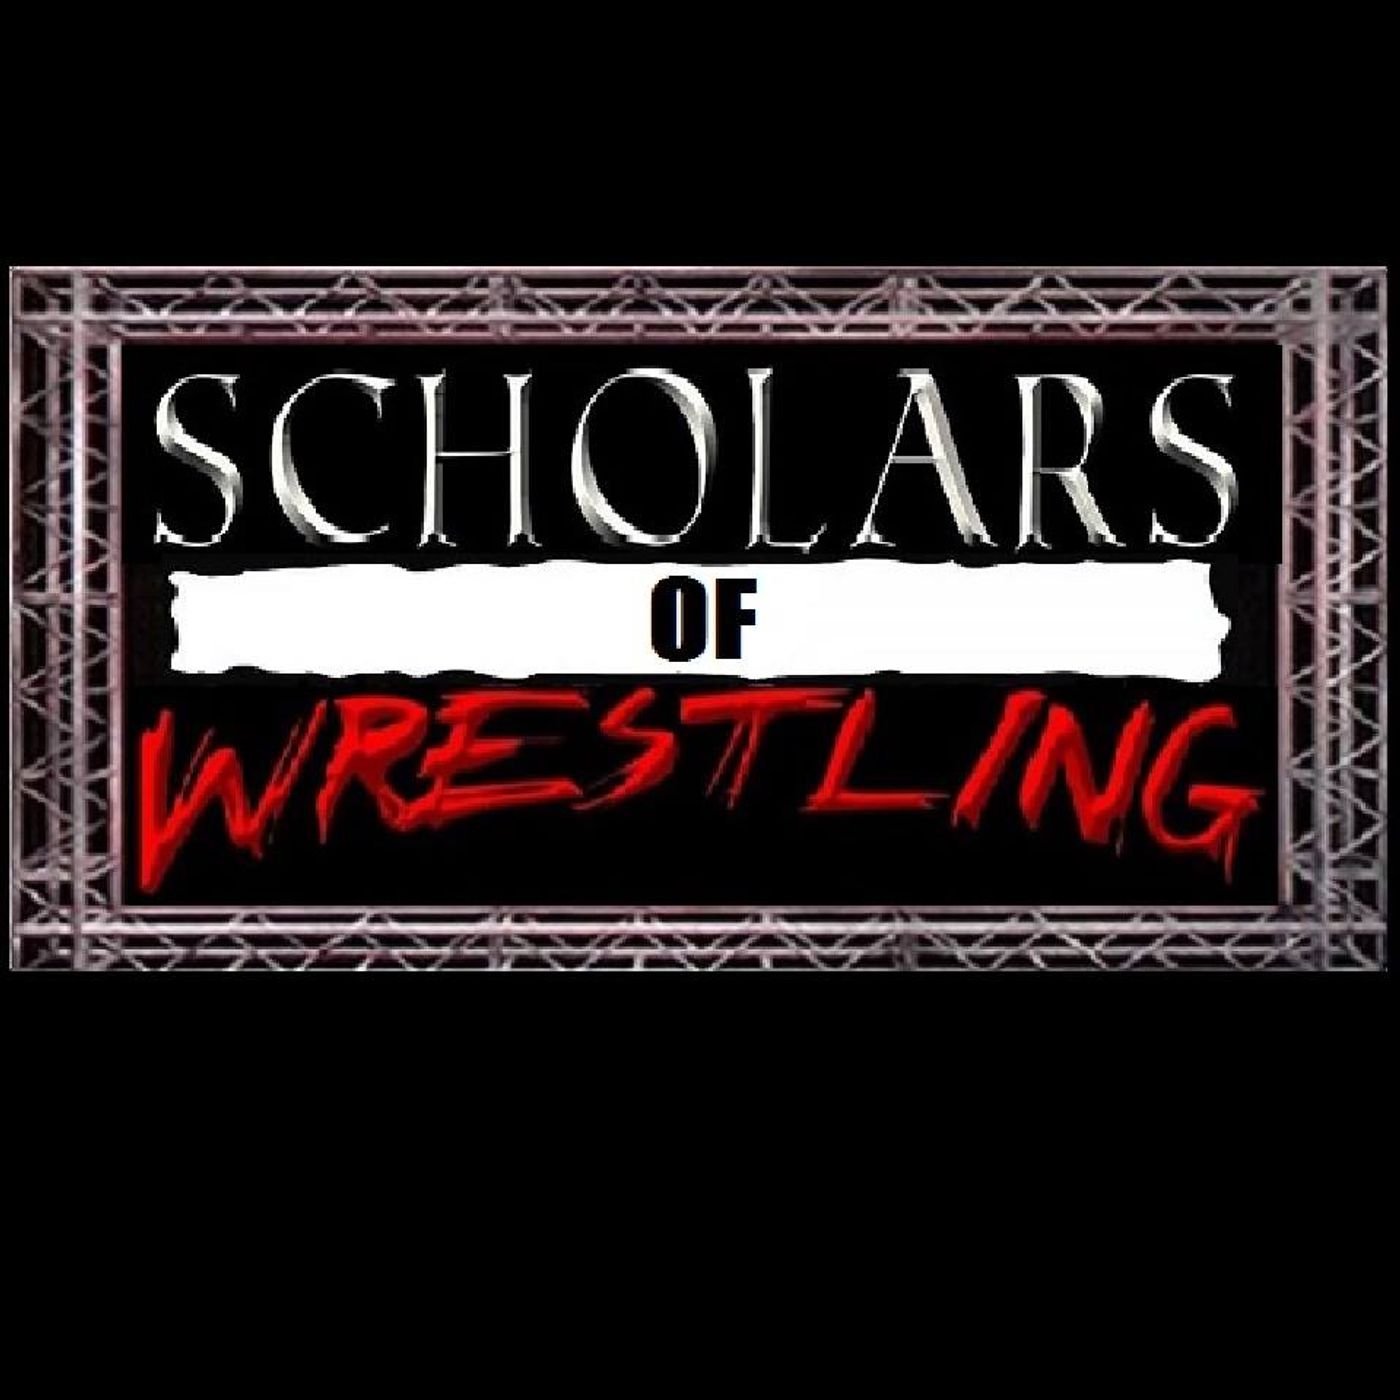 The Scholars of Wrestling Show